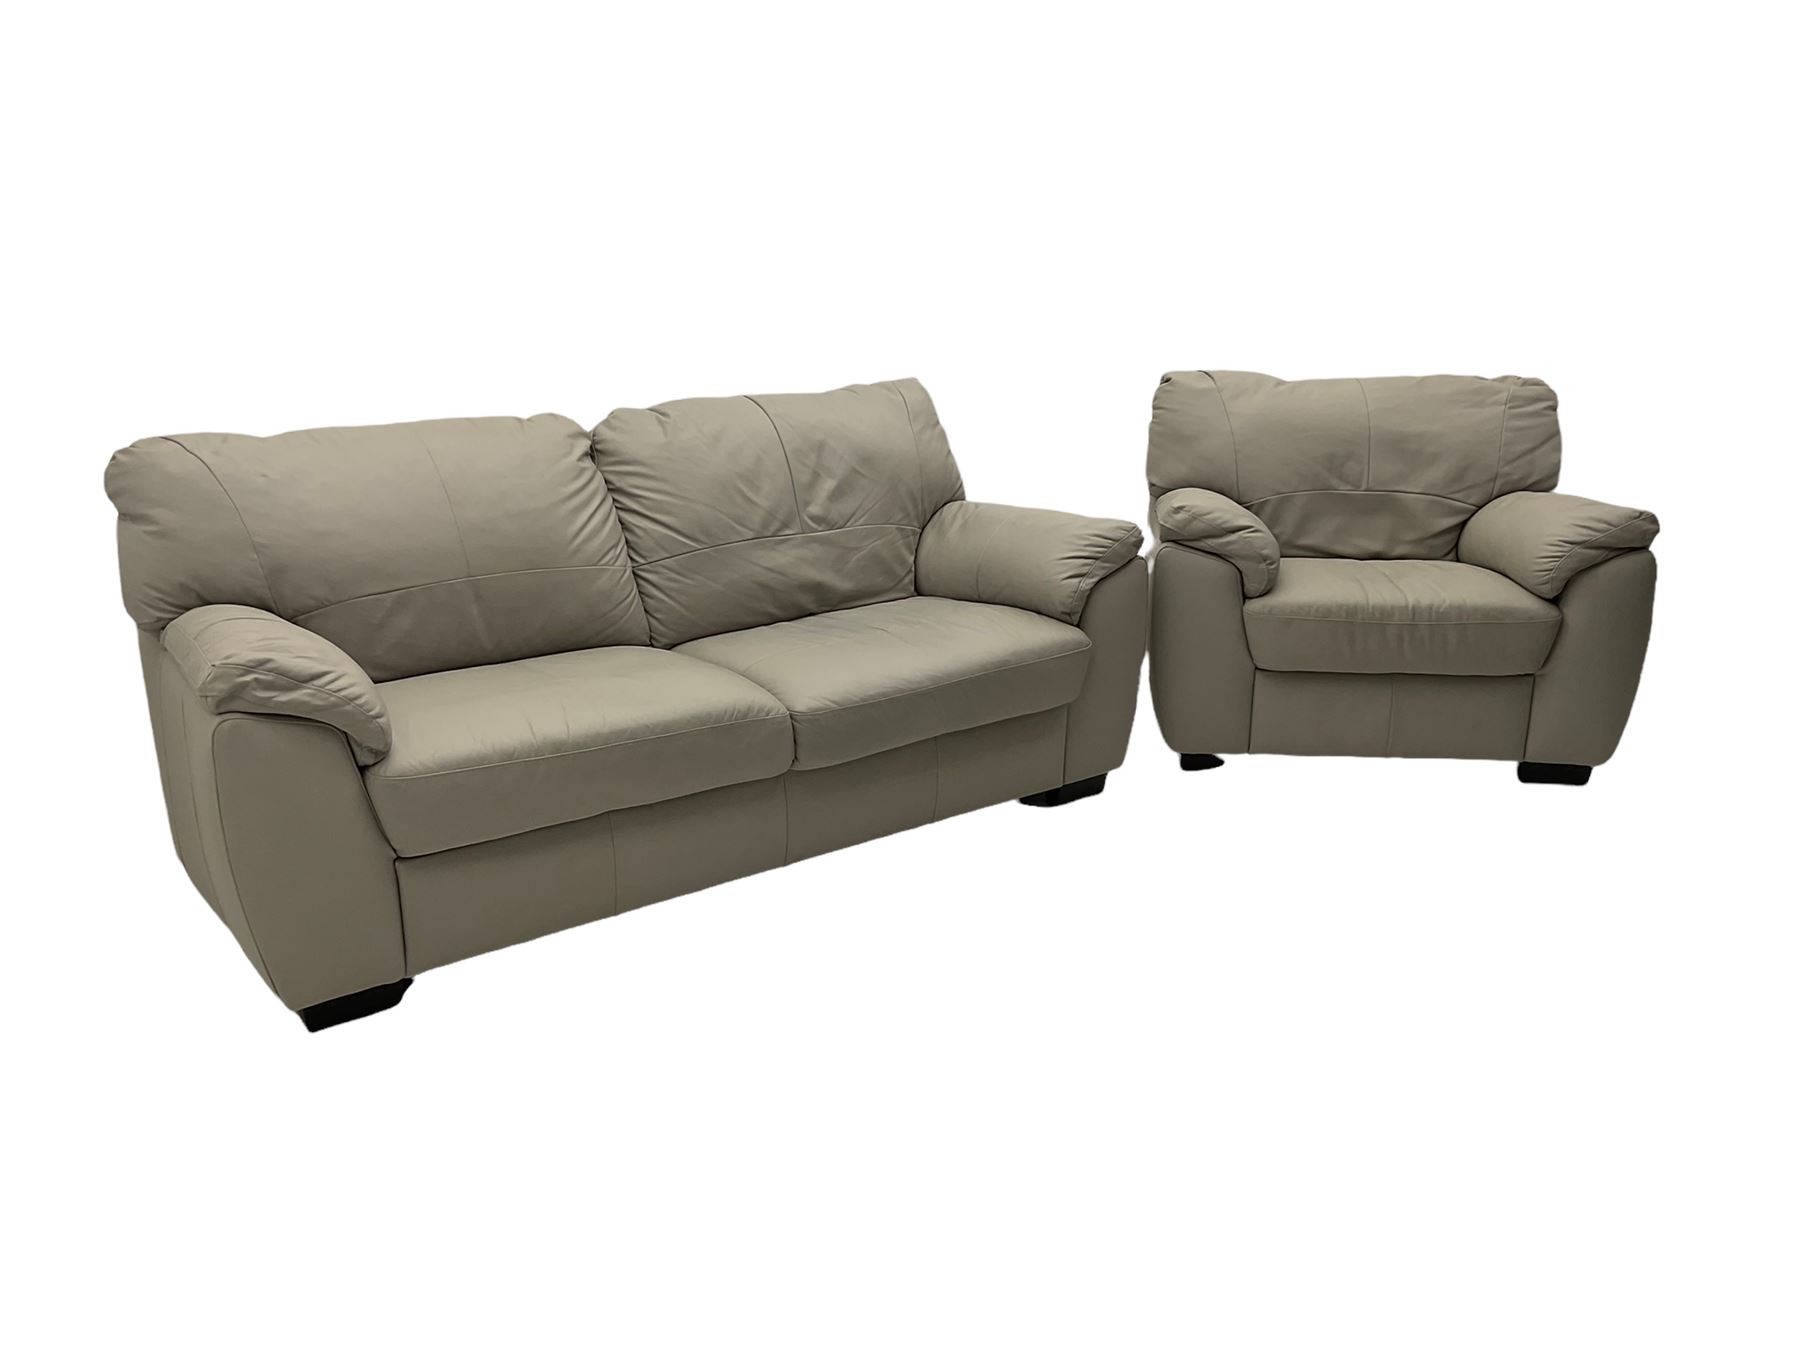 Two seat sofa (W185cm) - Image 3 of 8